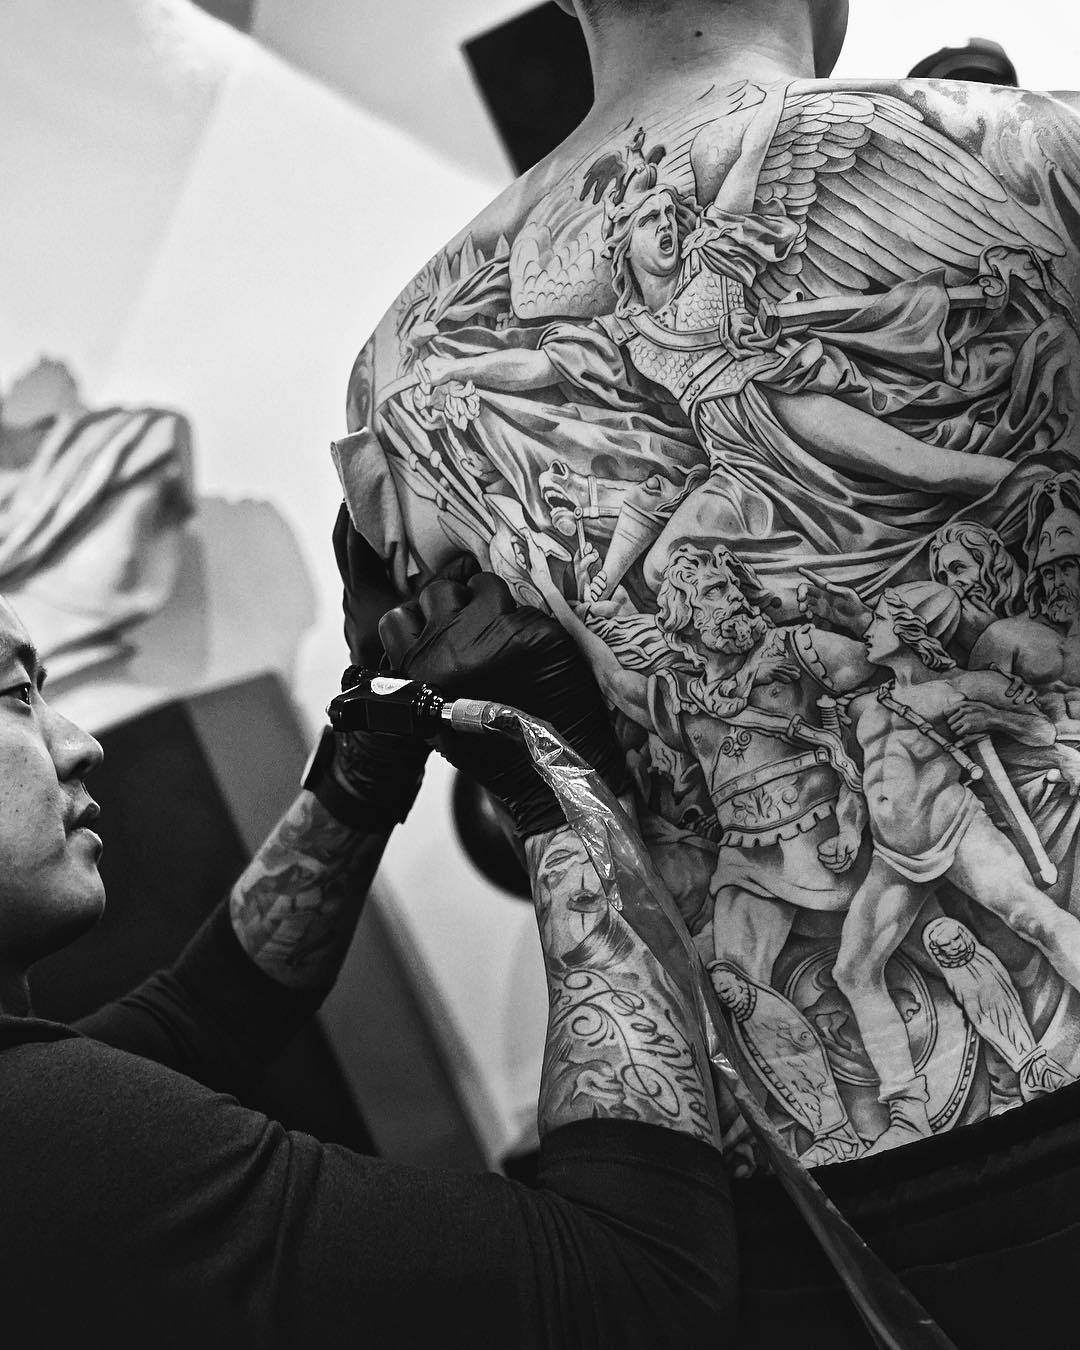 30 Unique Angel Tattoo Design Ideas And The Meaning Behind Them  Saved  Tattoo